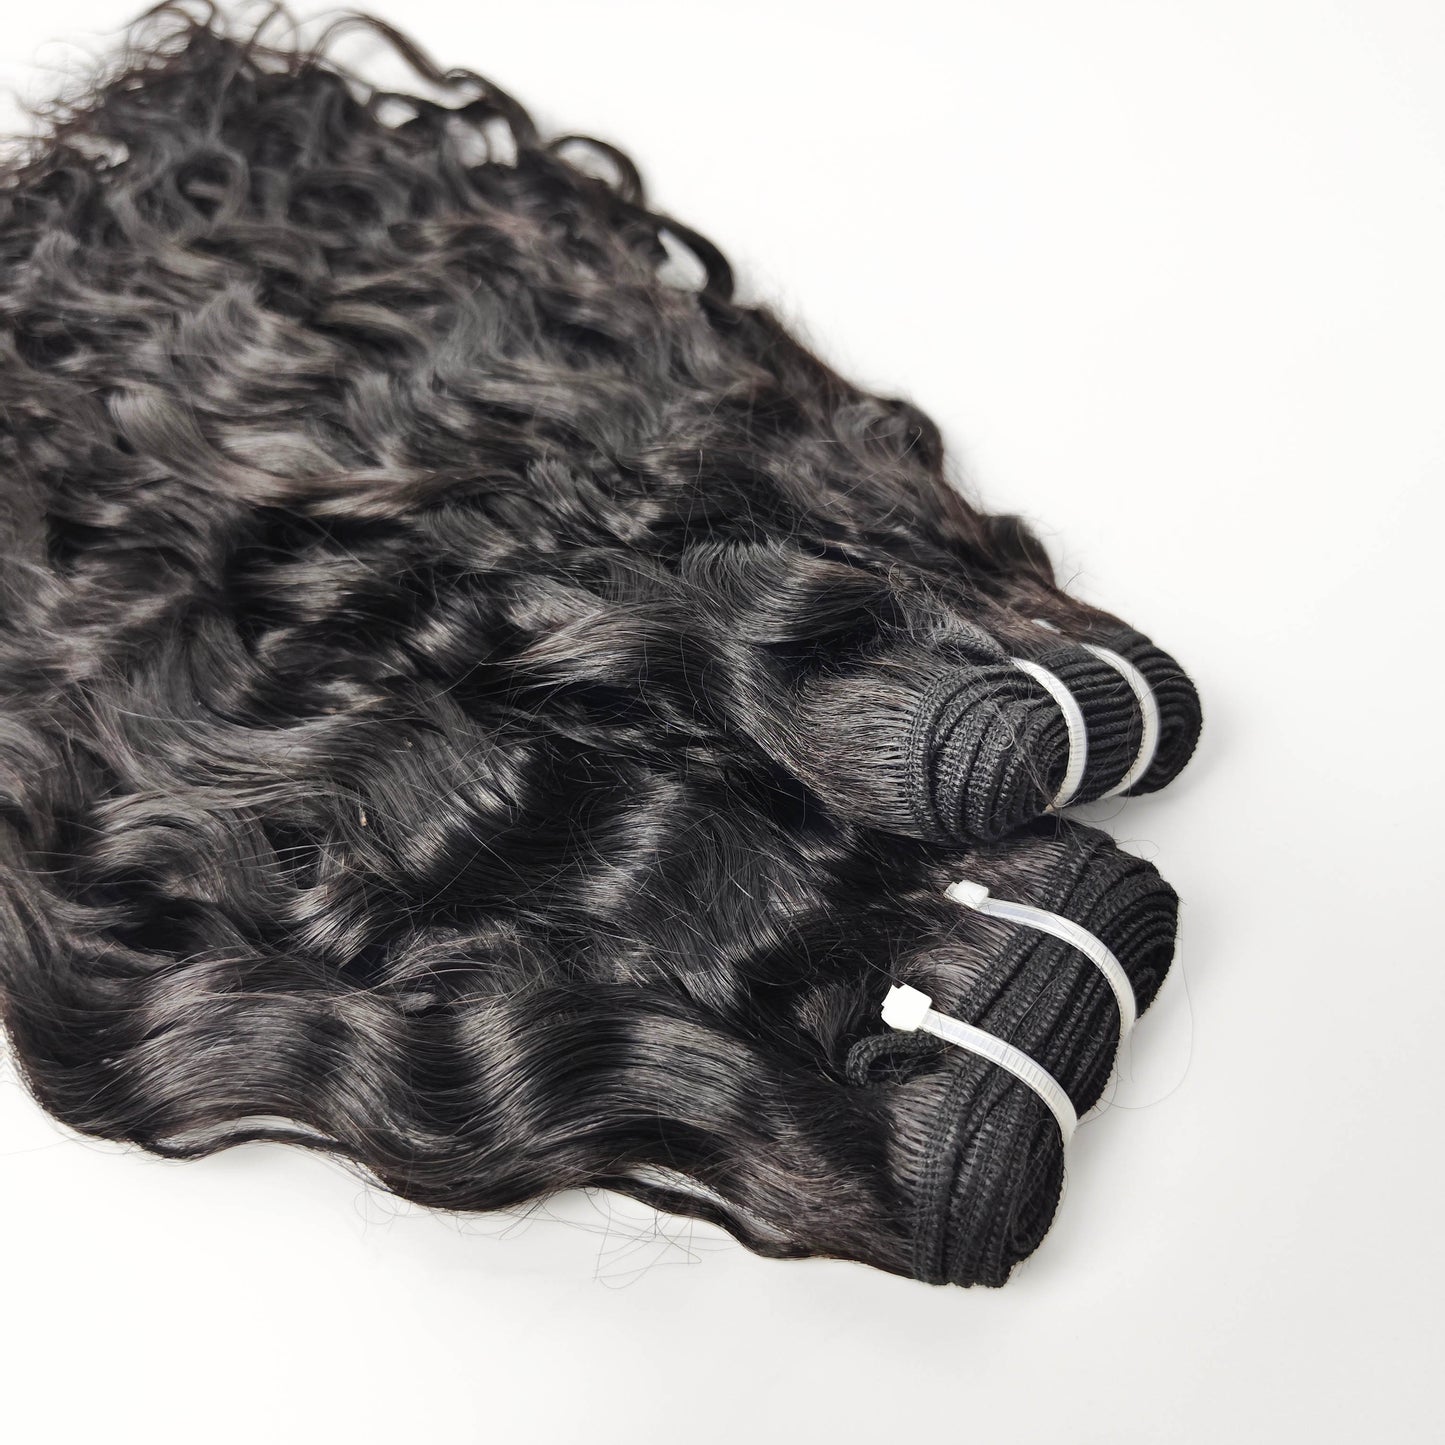 French Wave Virgin Human Hair Extensions with 3 Years Life Time